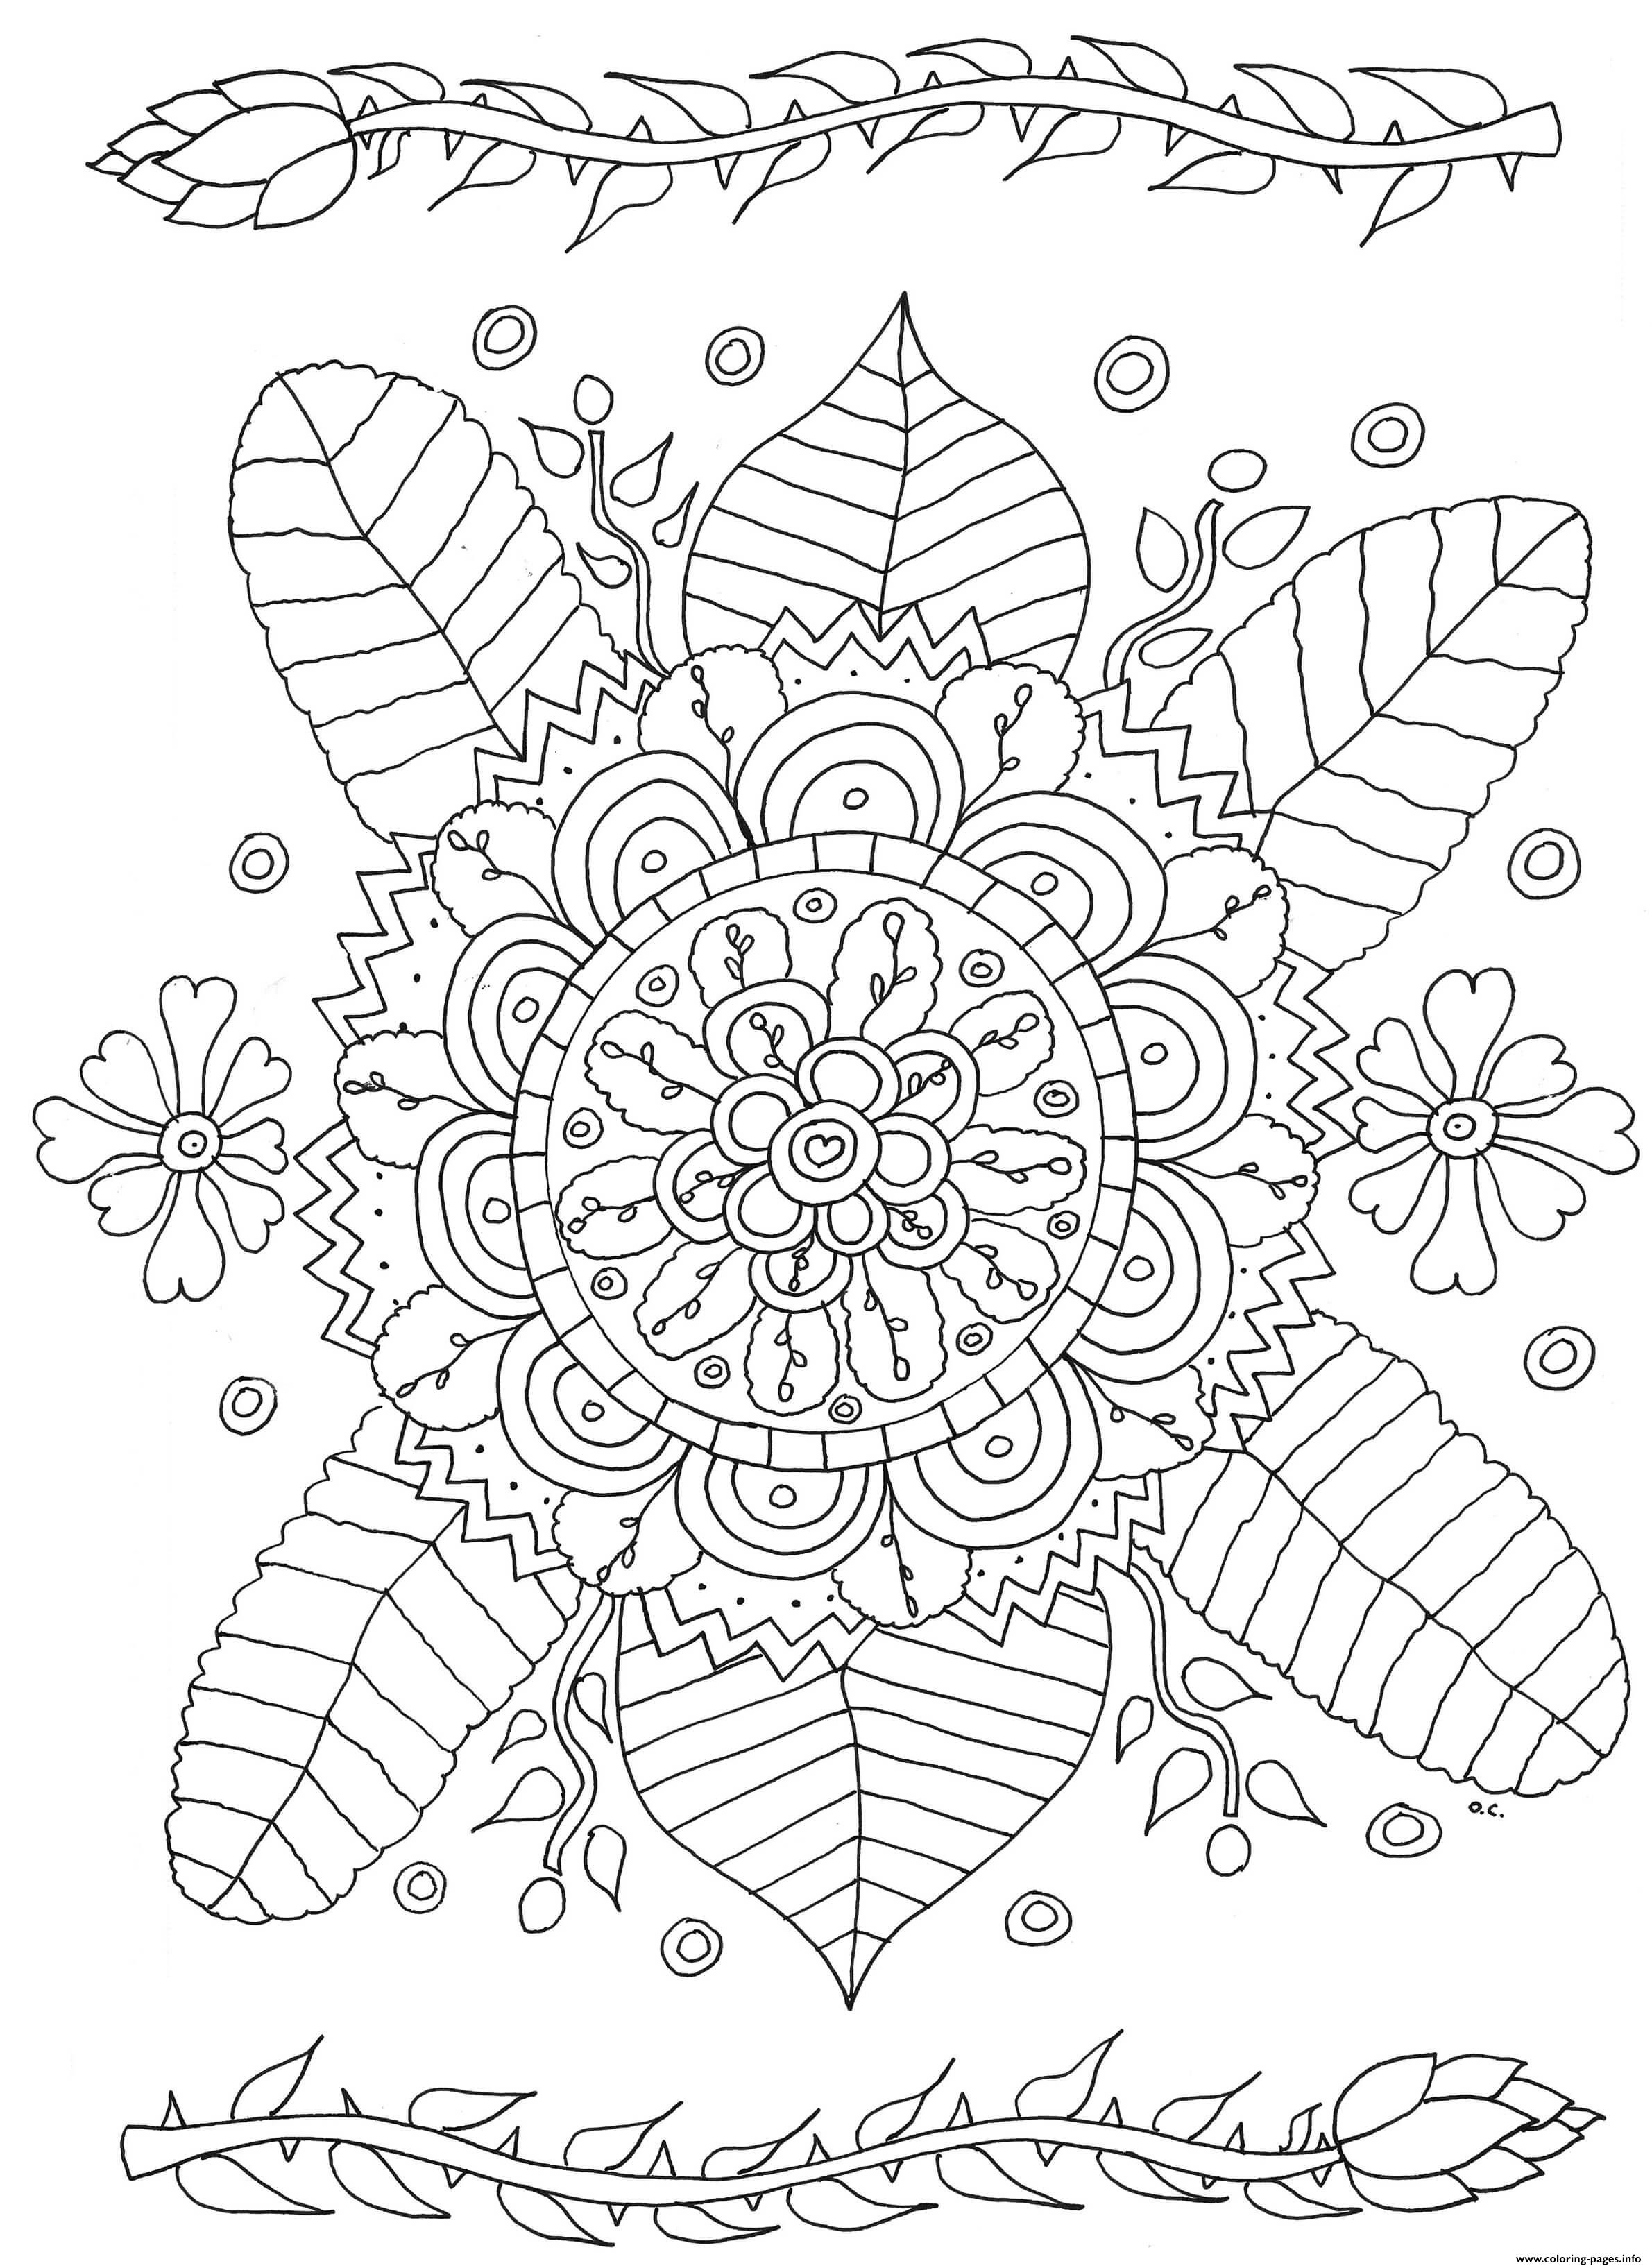 Printable Drawings For Coloring